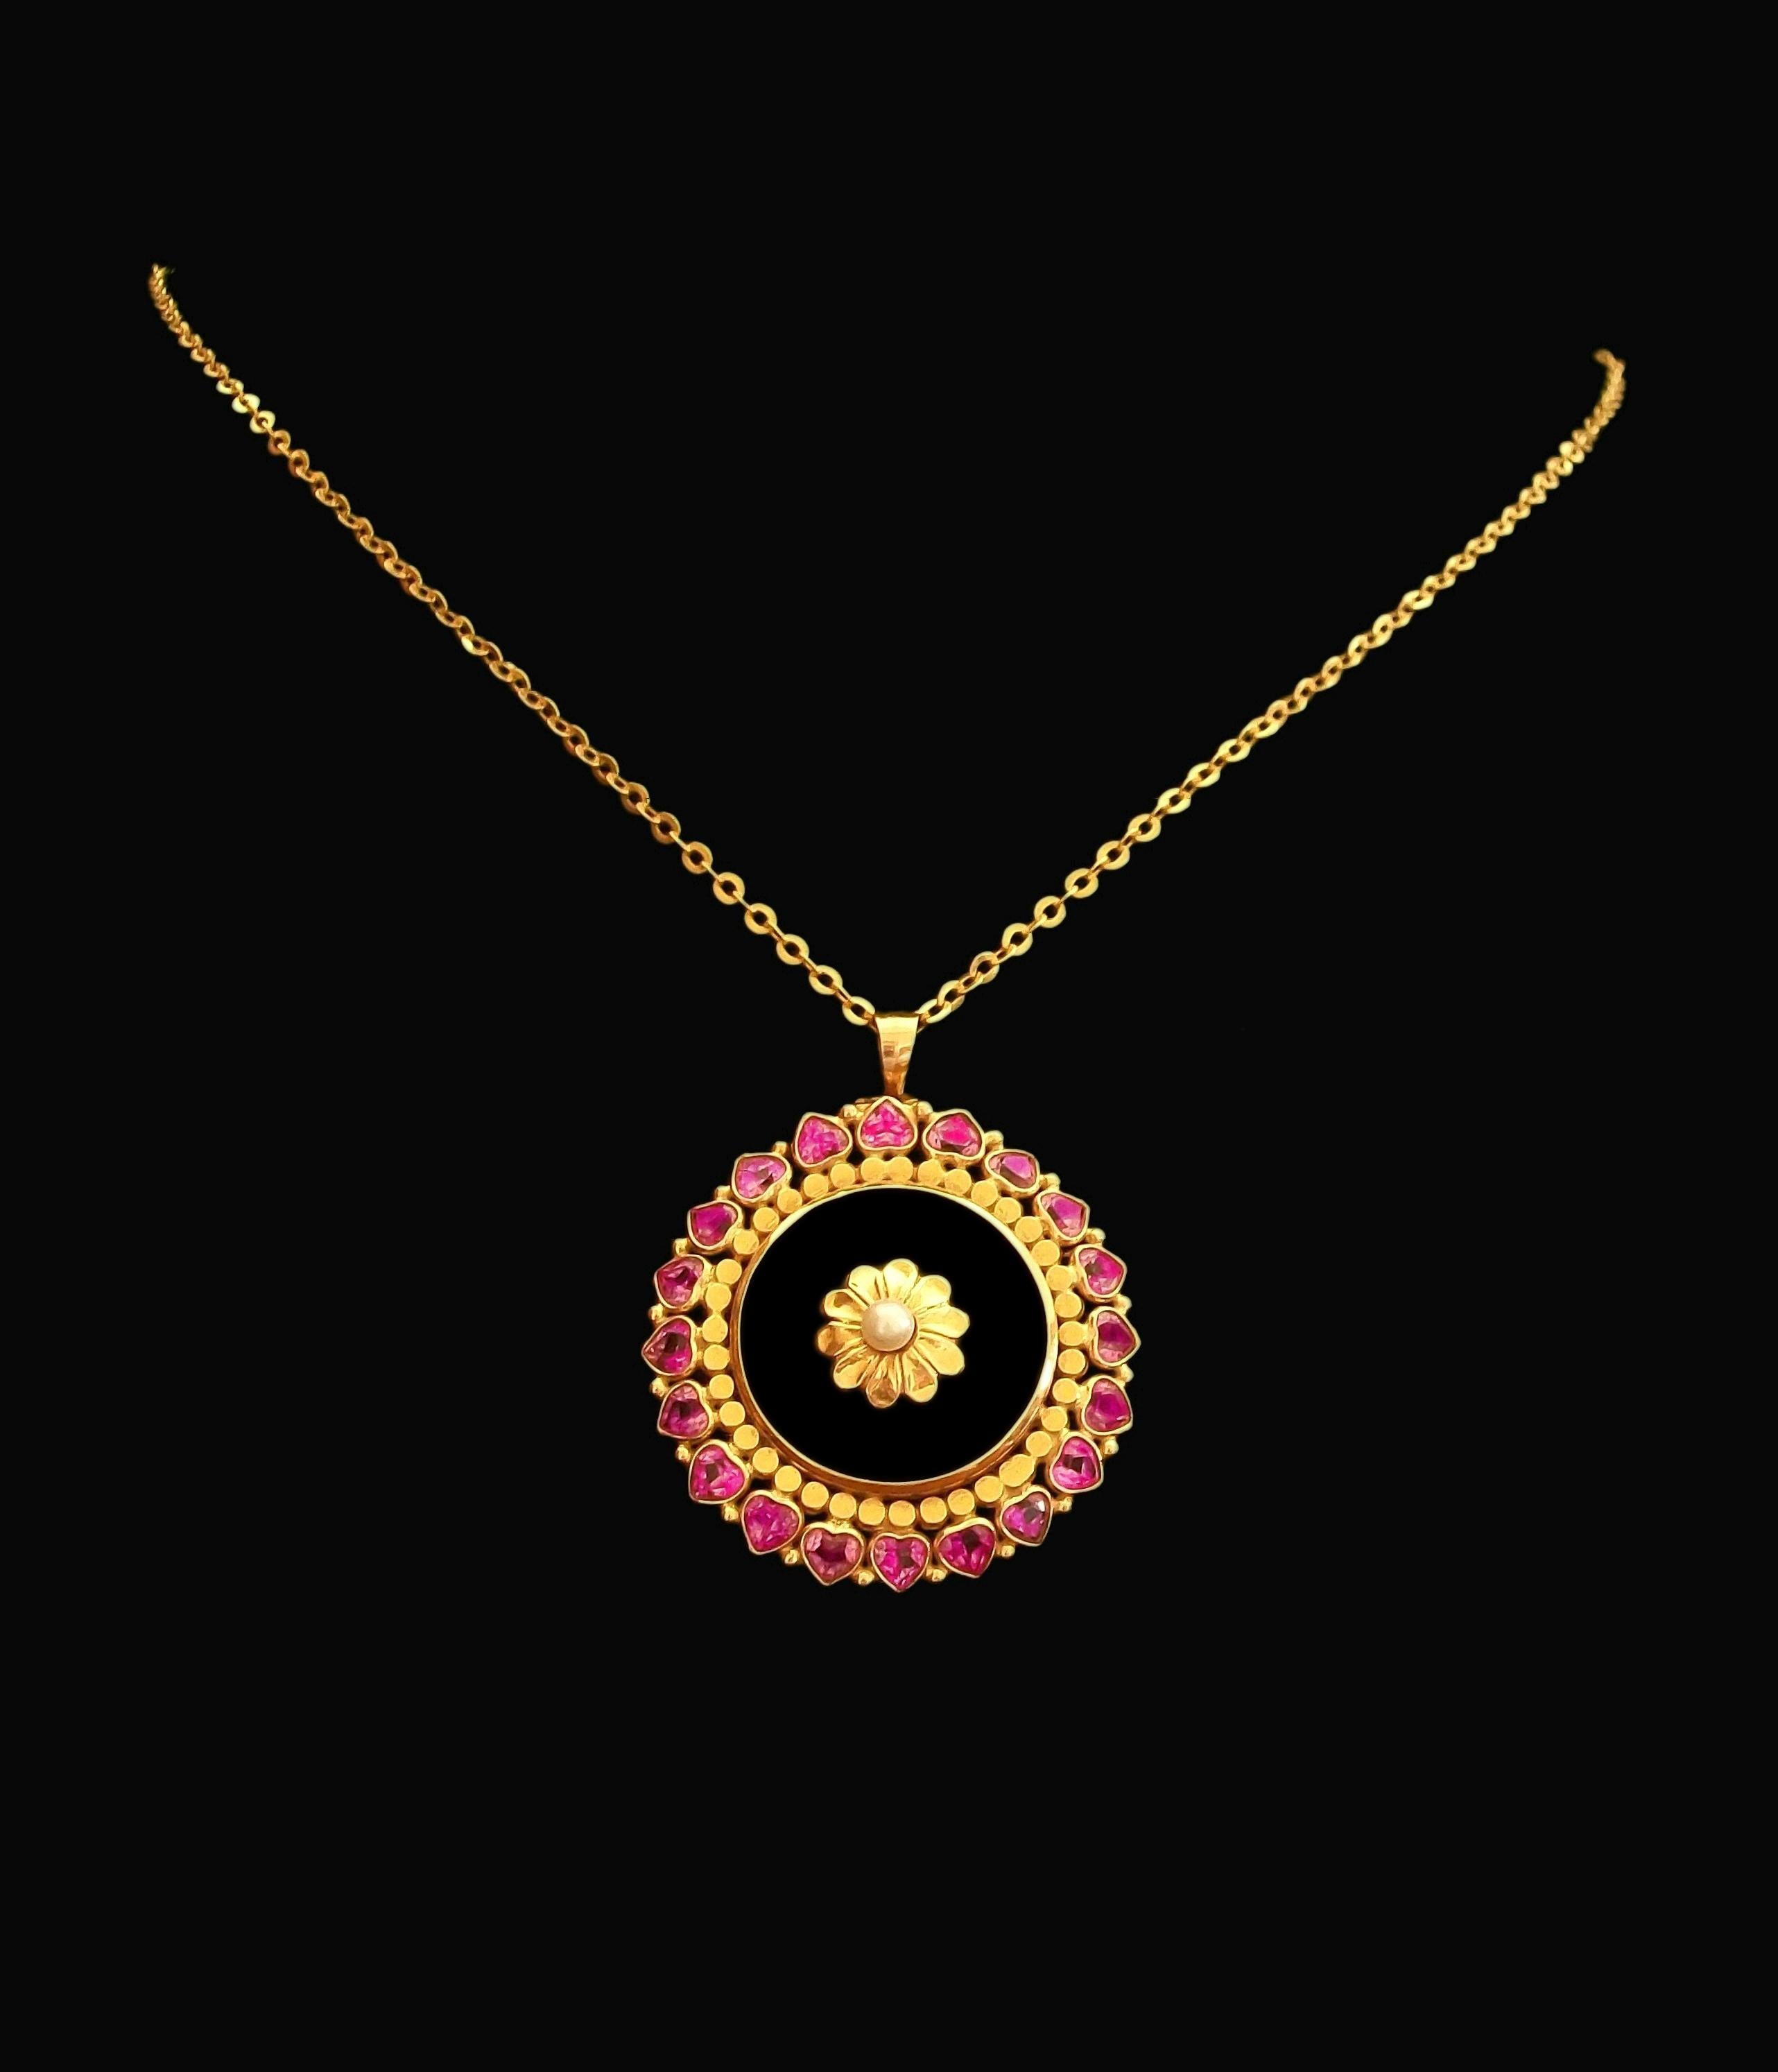 Art Deco 18K yellow gold circle pendant - the perimeter with 20 heart shaped bezel set Pink Sapphires (each 3.5 mm. x 4 mm. x 2.5 mm. deep - approximately 0.23 carats each - 4.6 carats total) set against a solid gold circle border - natural polished